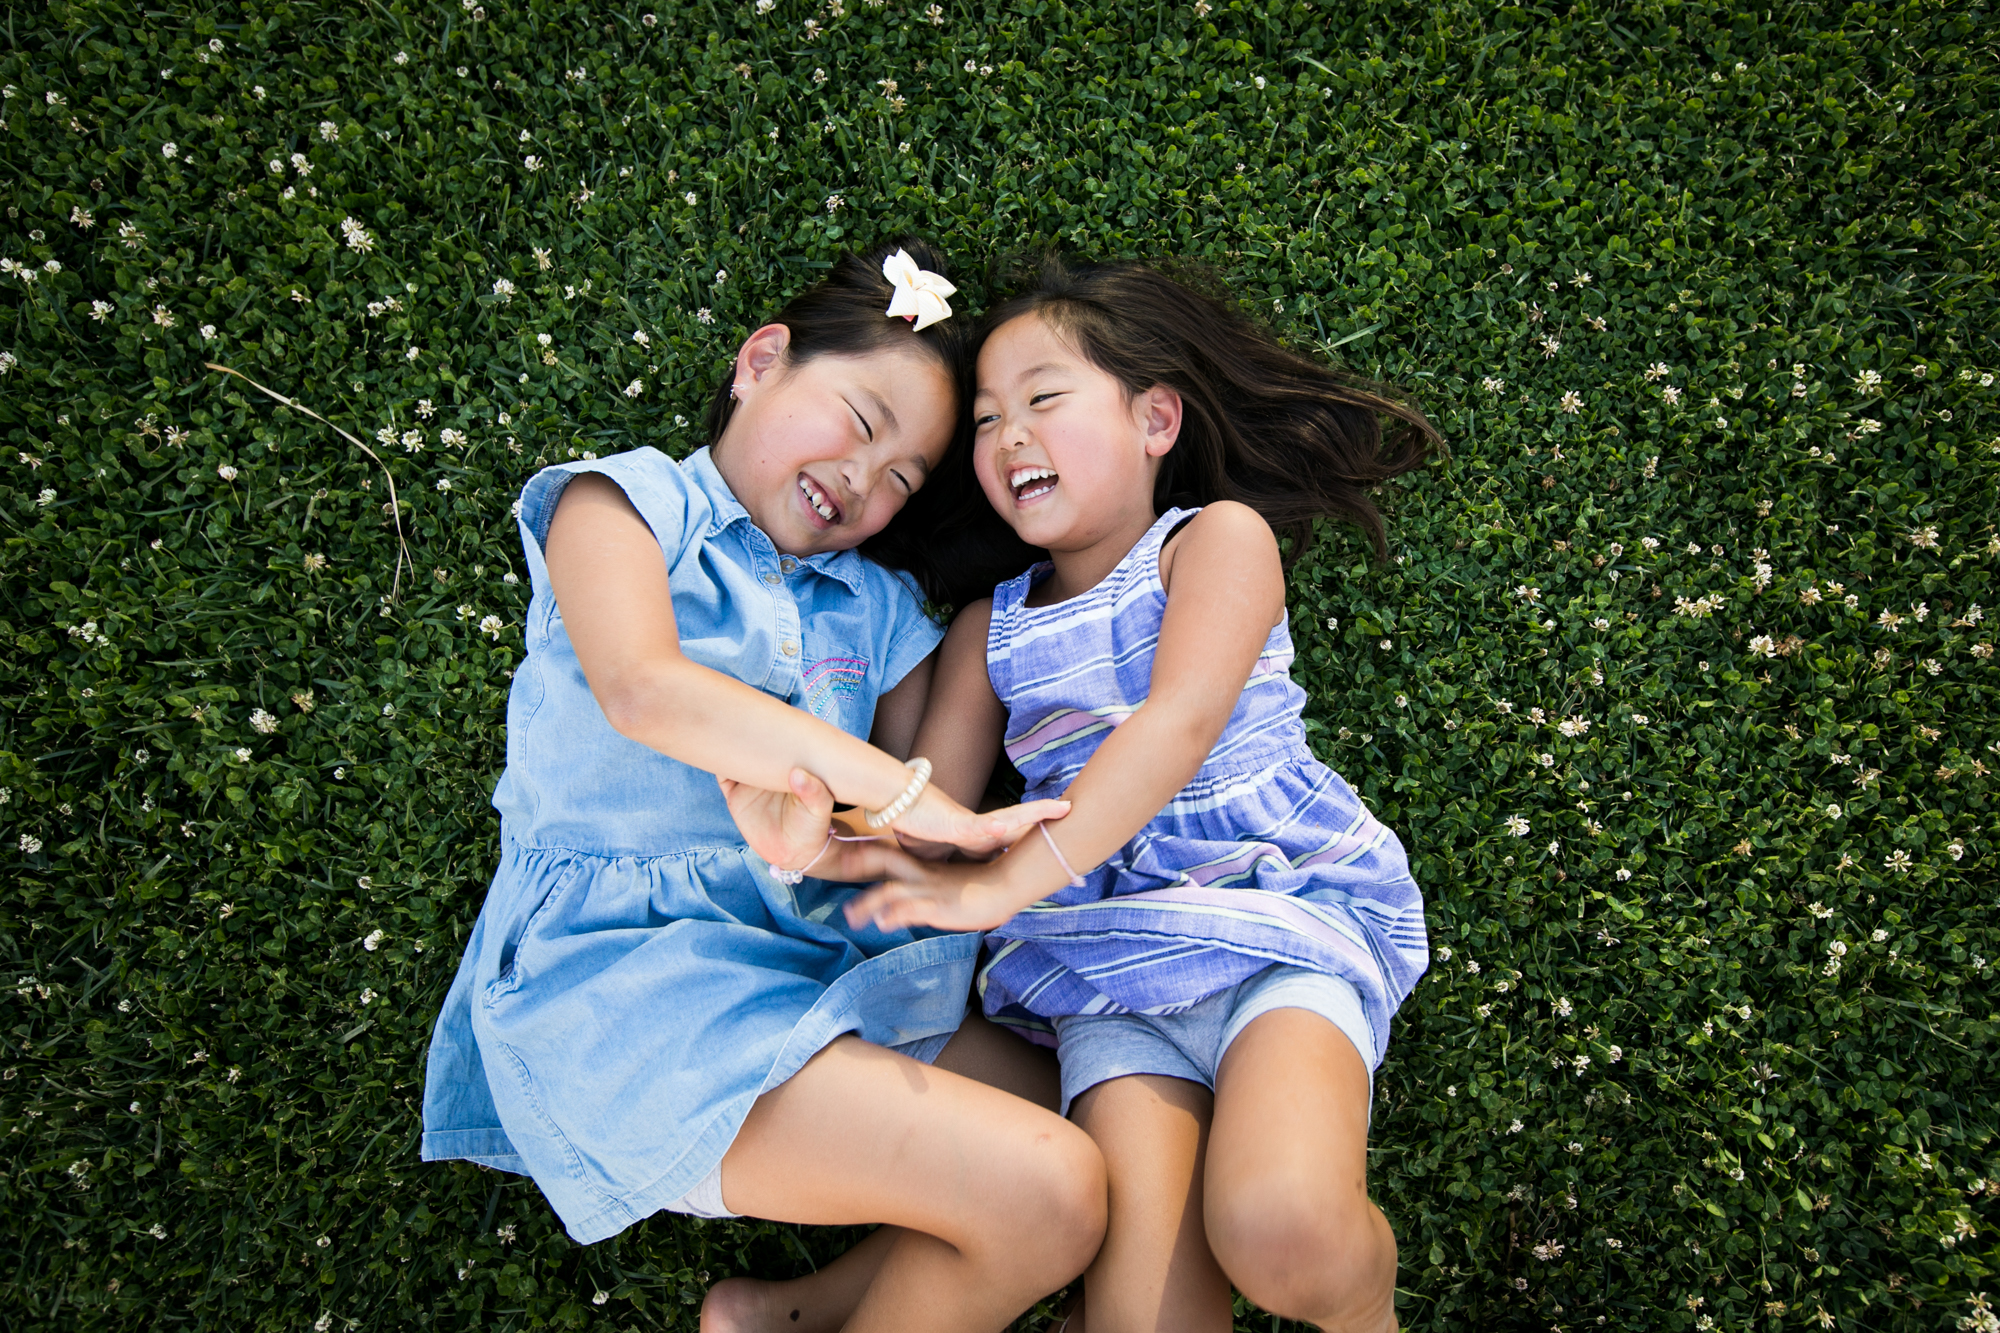 girls giggle in grass beverly hills